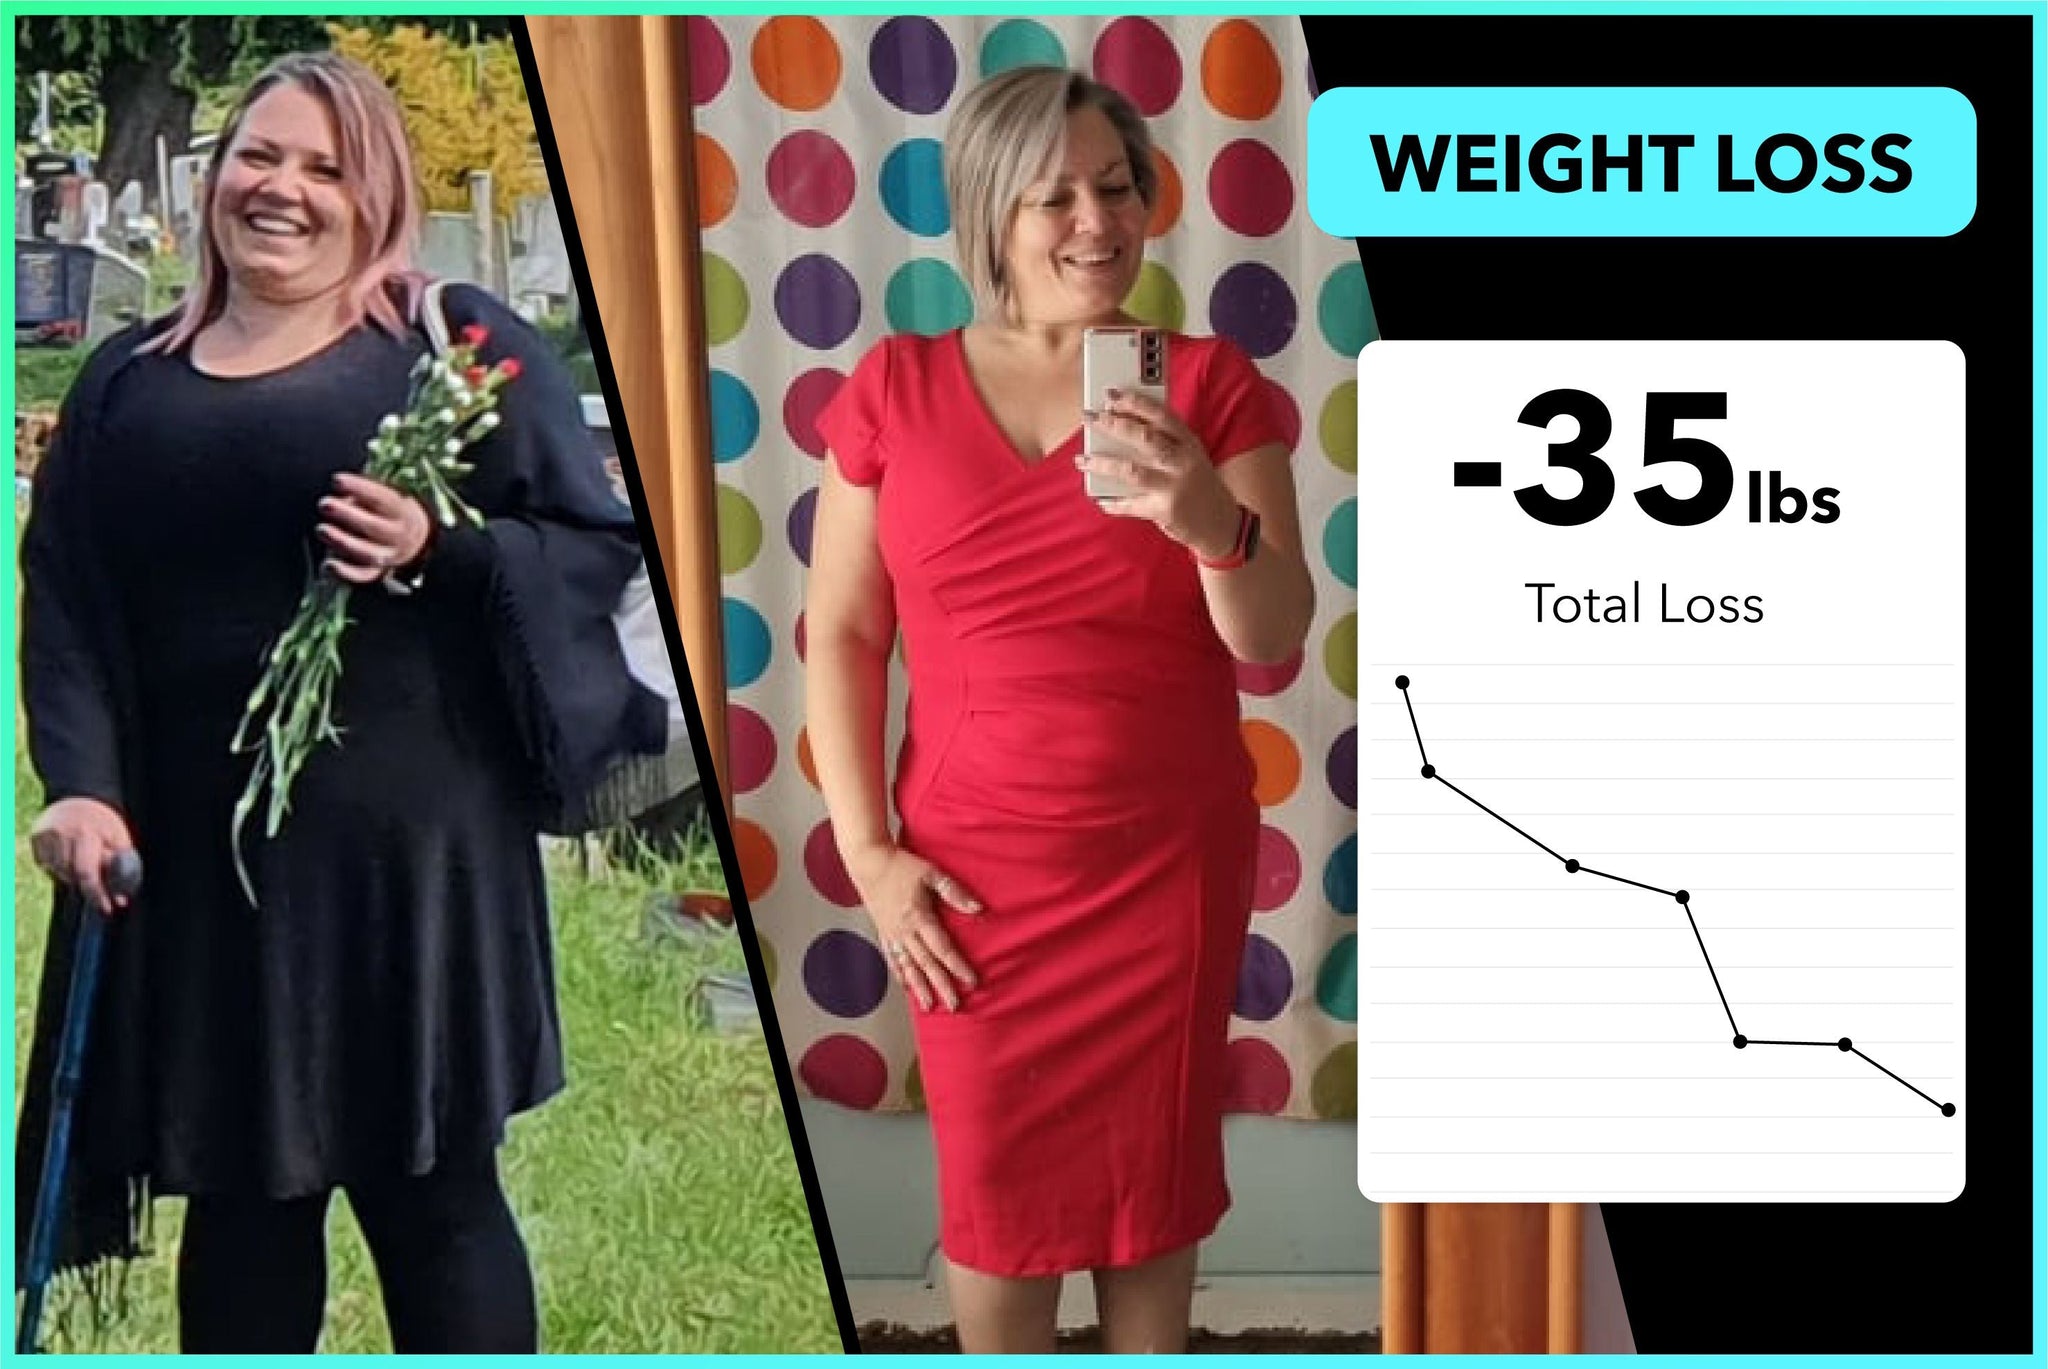 Leah lost 35lbs with Team RH!